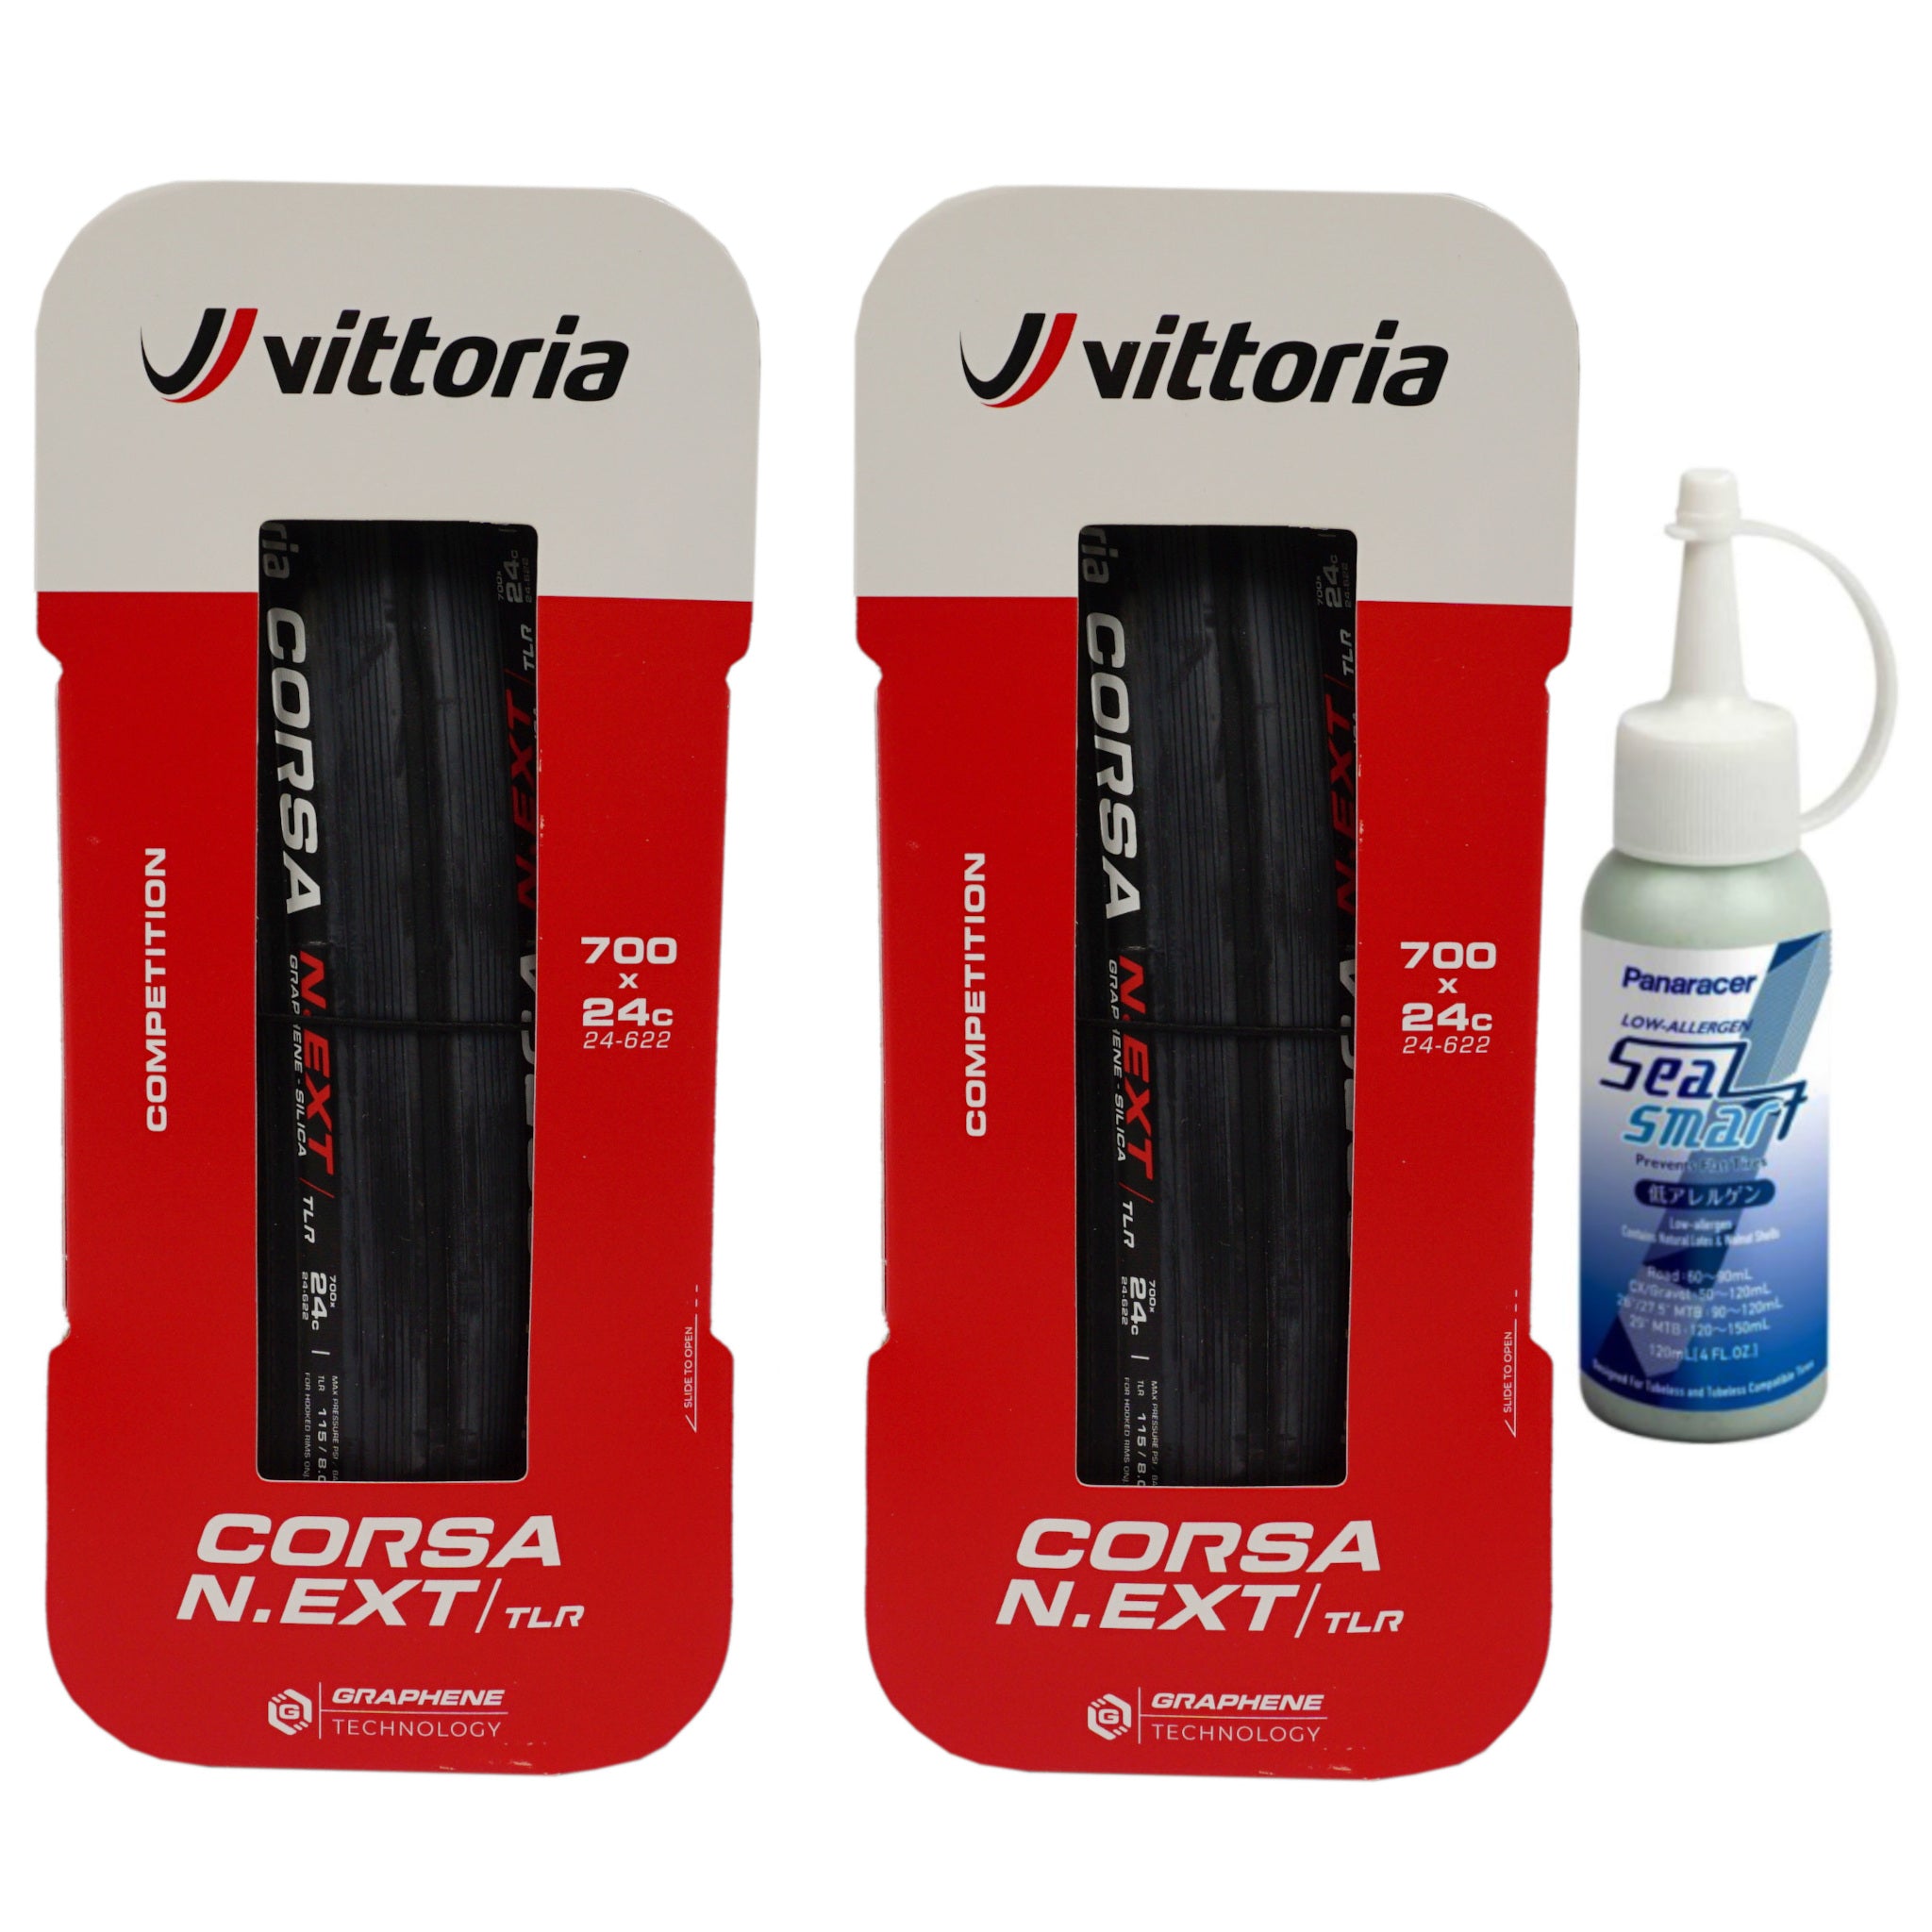 Vittoria Corsa Pro TLR 700c Tanwall Tubeless Tires - 2-Pack w-Free Sealant